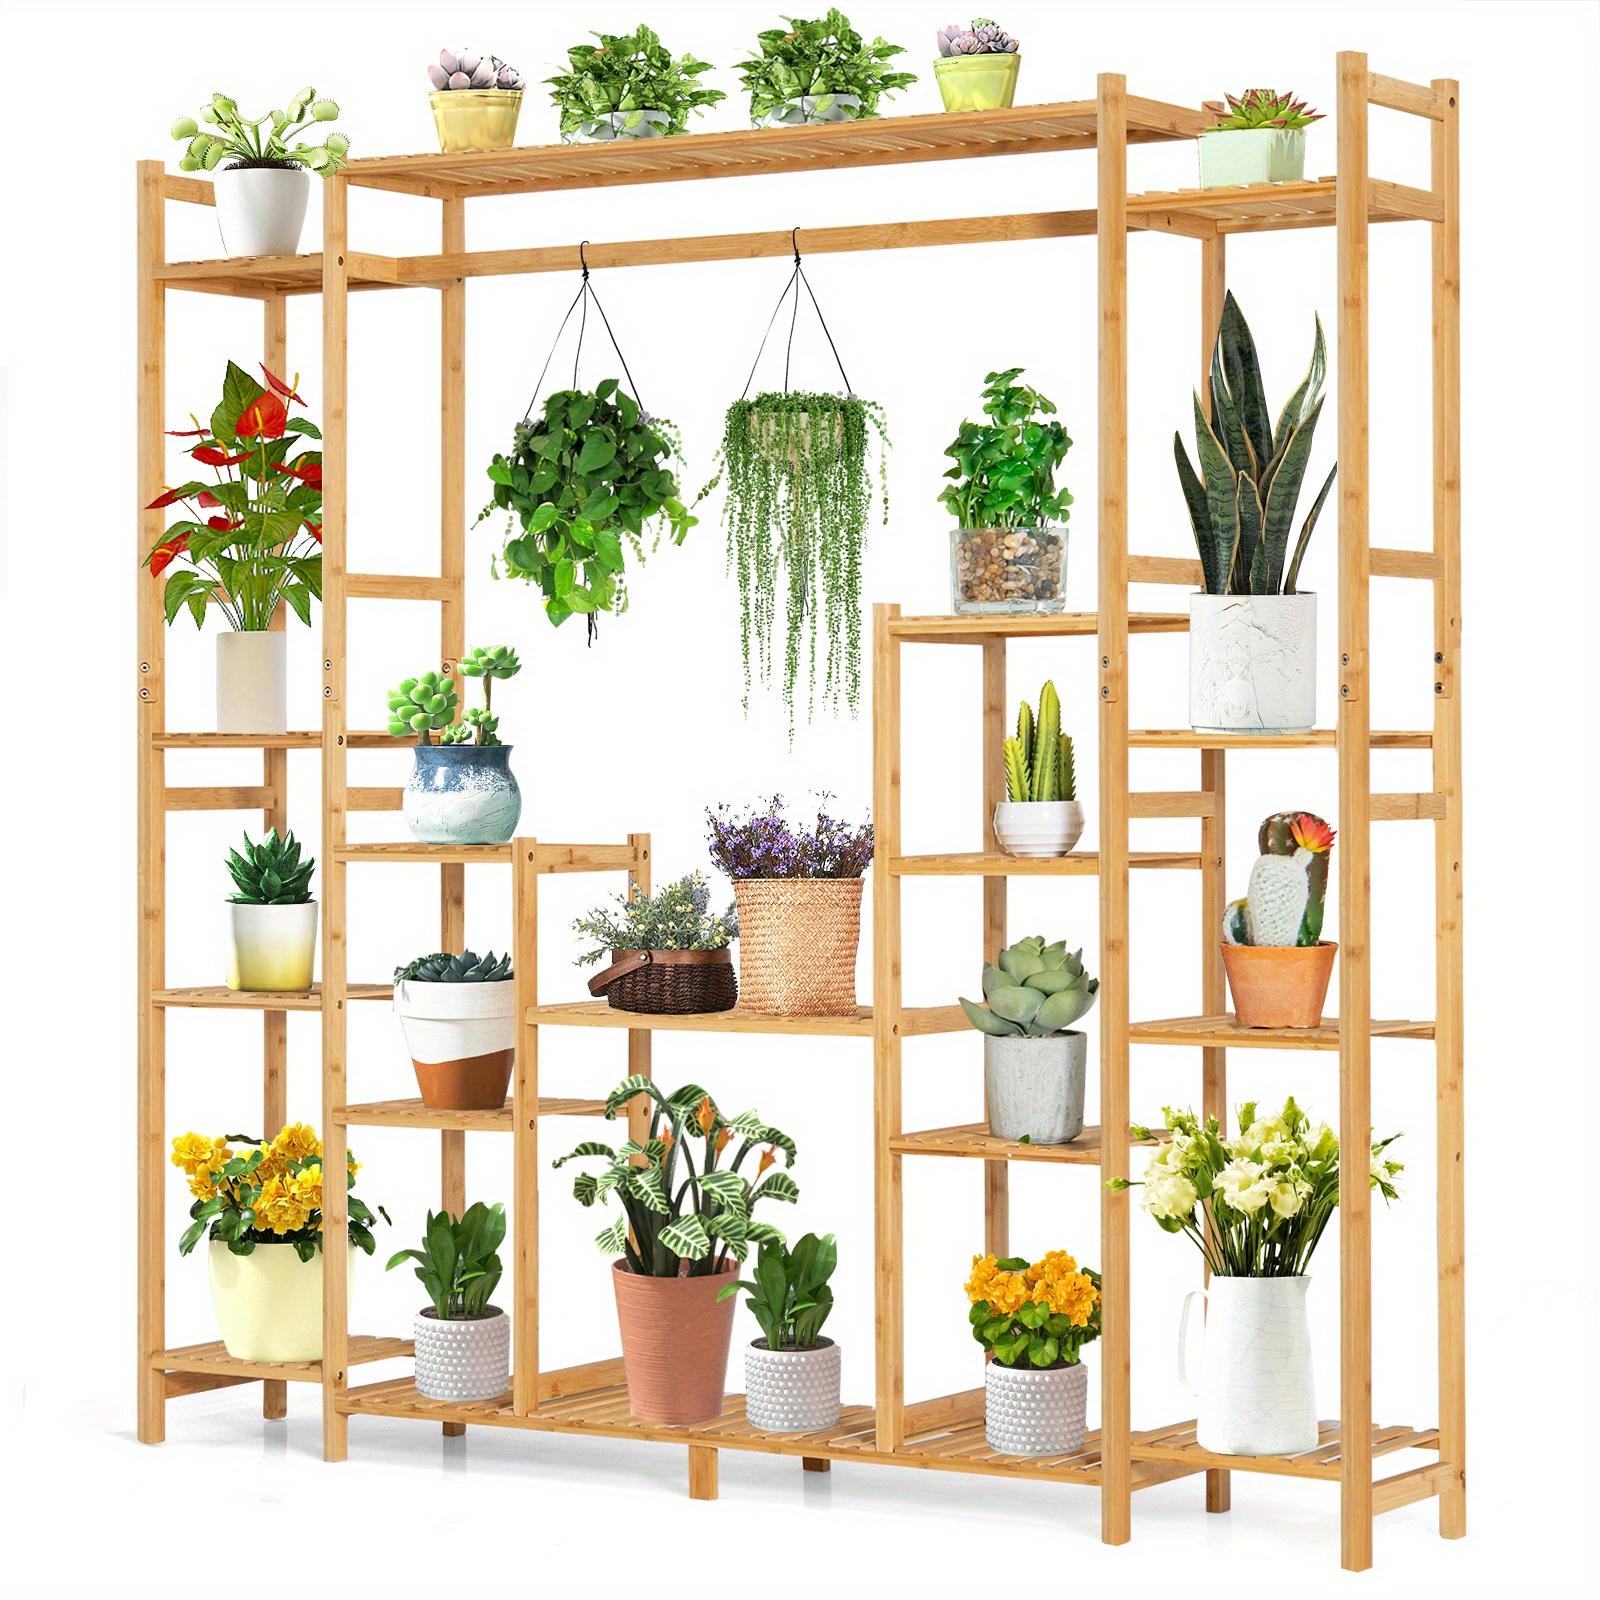 

Multigot 9-tier Bamboo Plant Stand Potted Holder W/hanging Rack Tall Display Shelf Unit